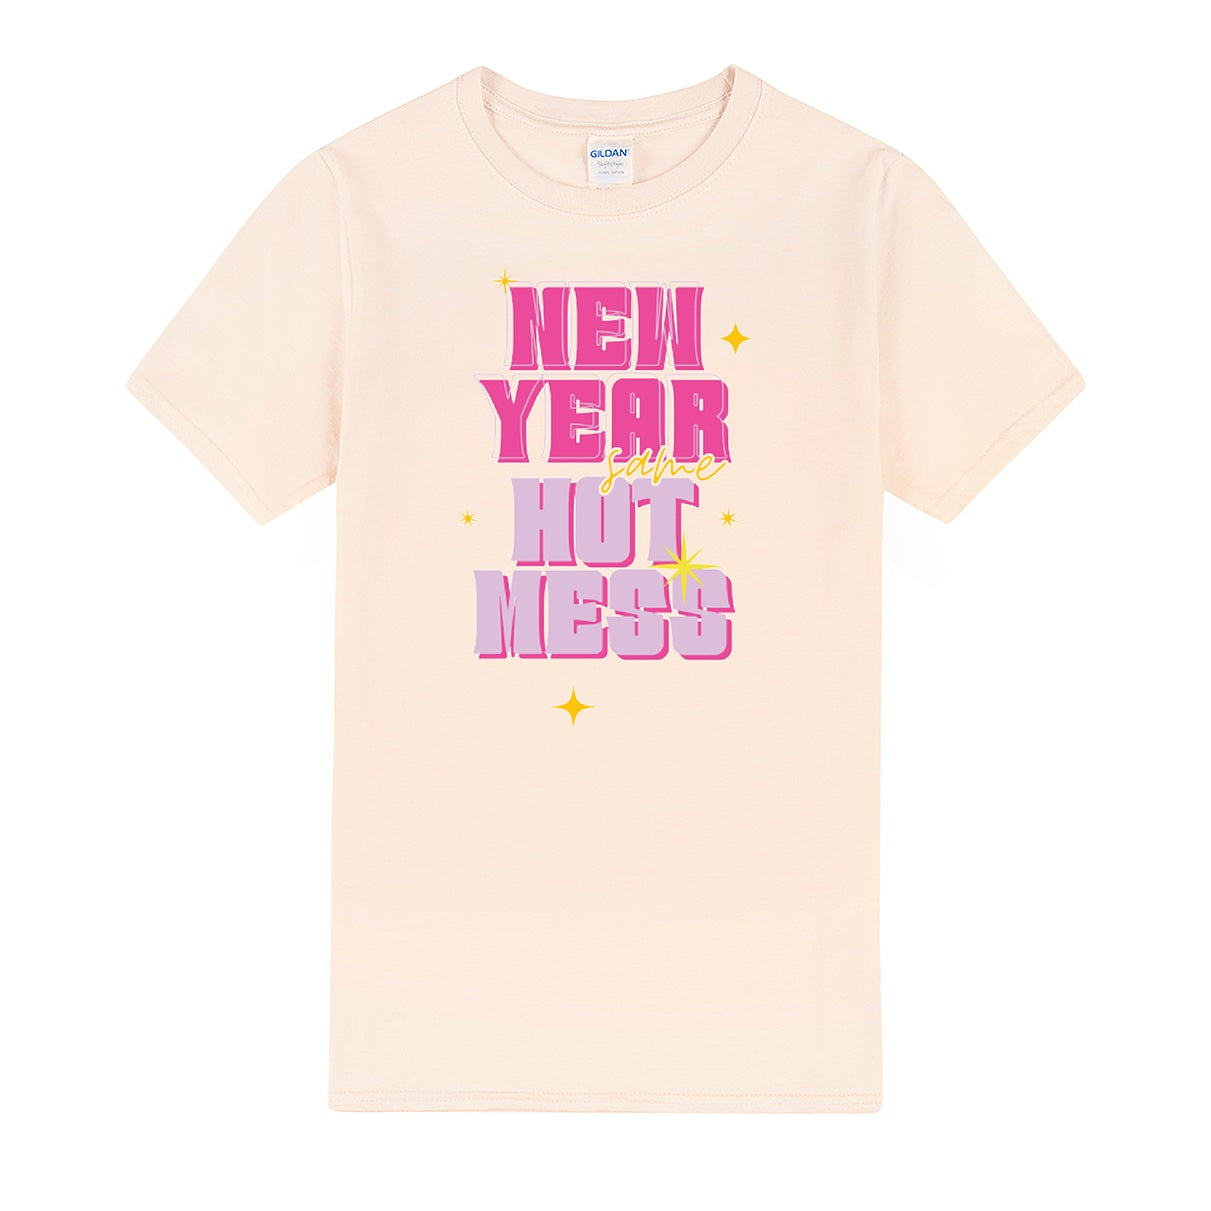 New year, same hot mess Softstyle Tee